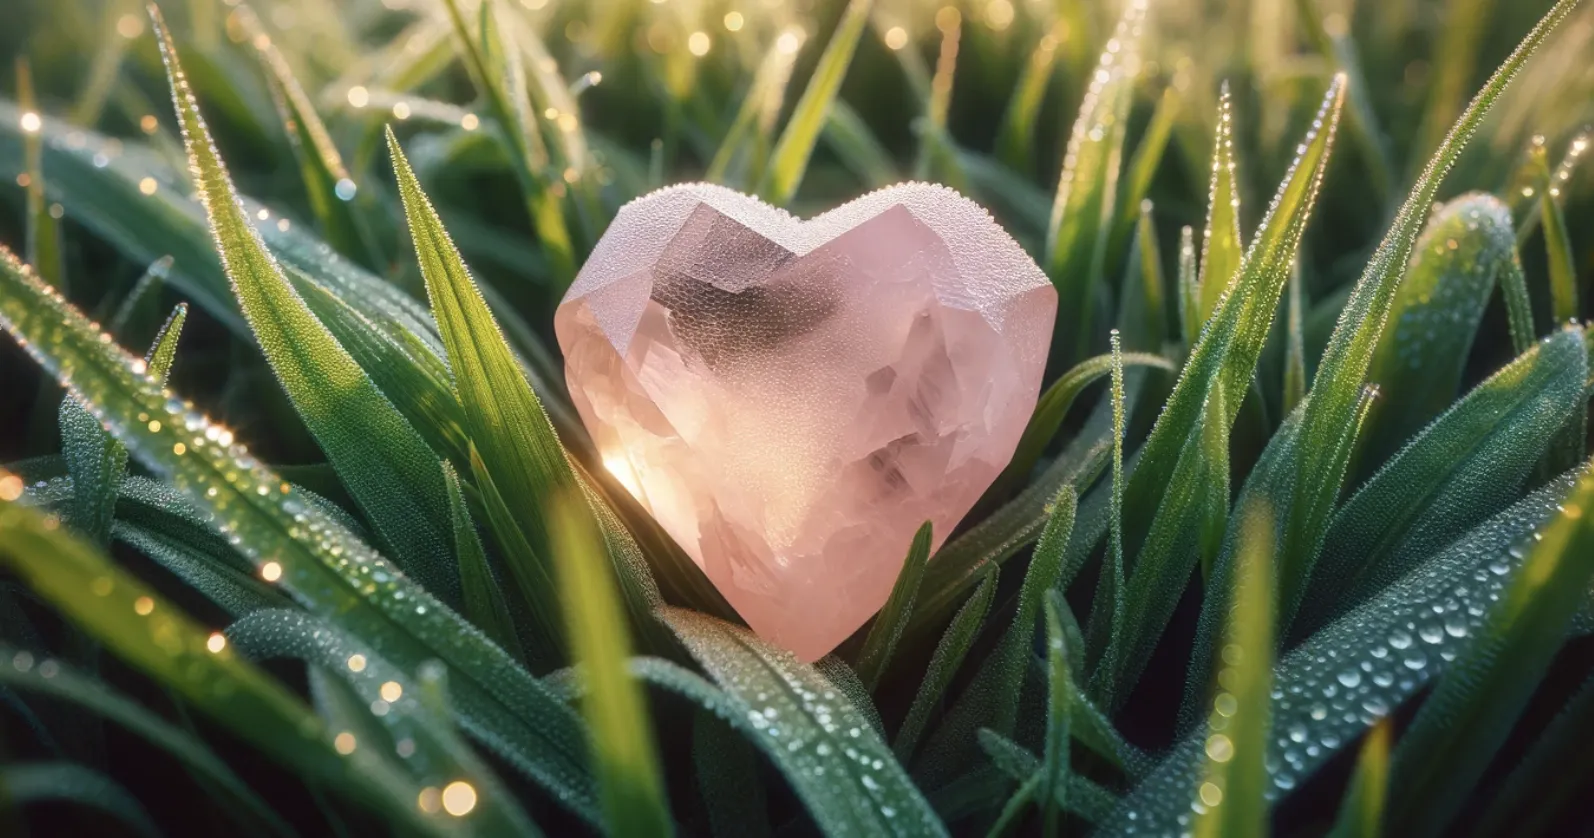 photo of a heart shaped rose quartz crystal resting on top of green grass with morning dew